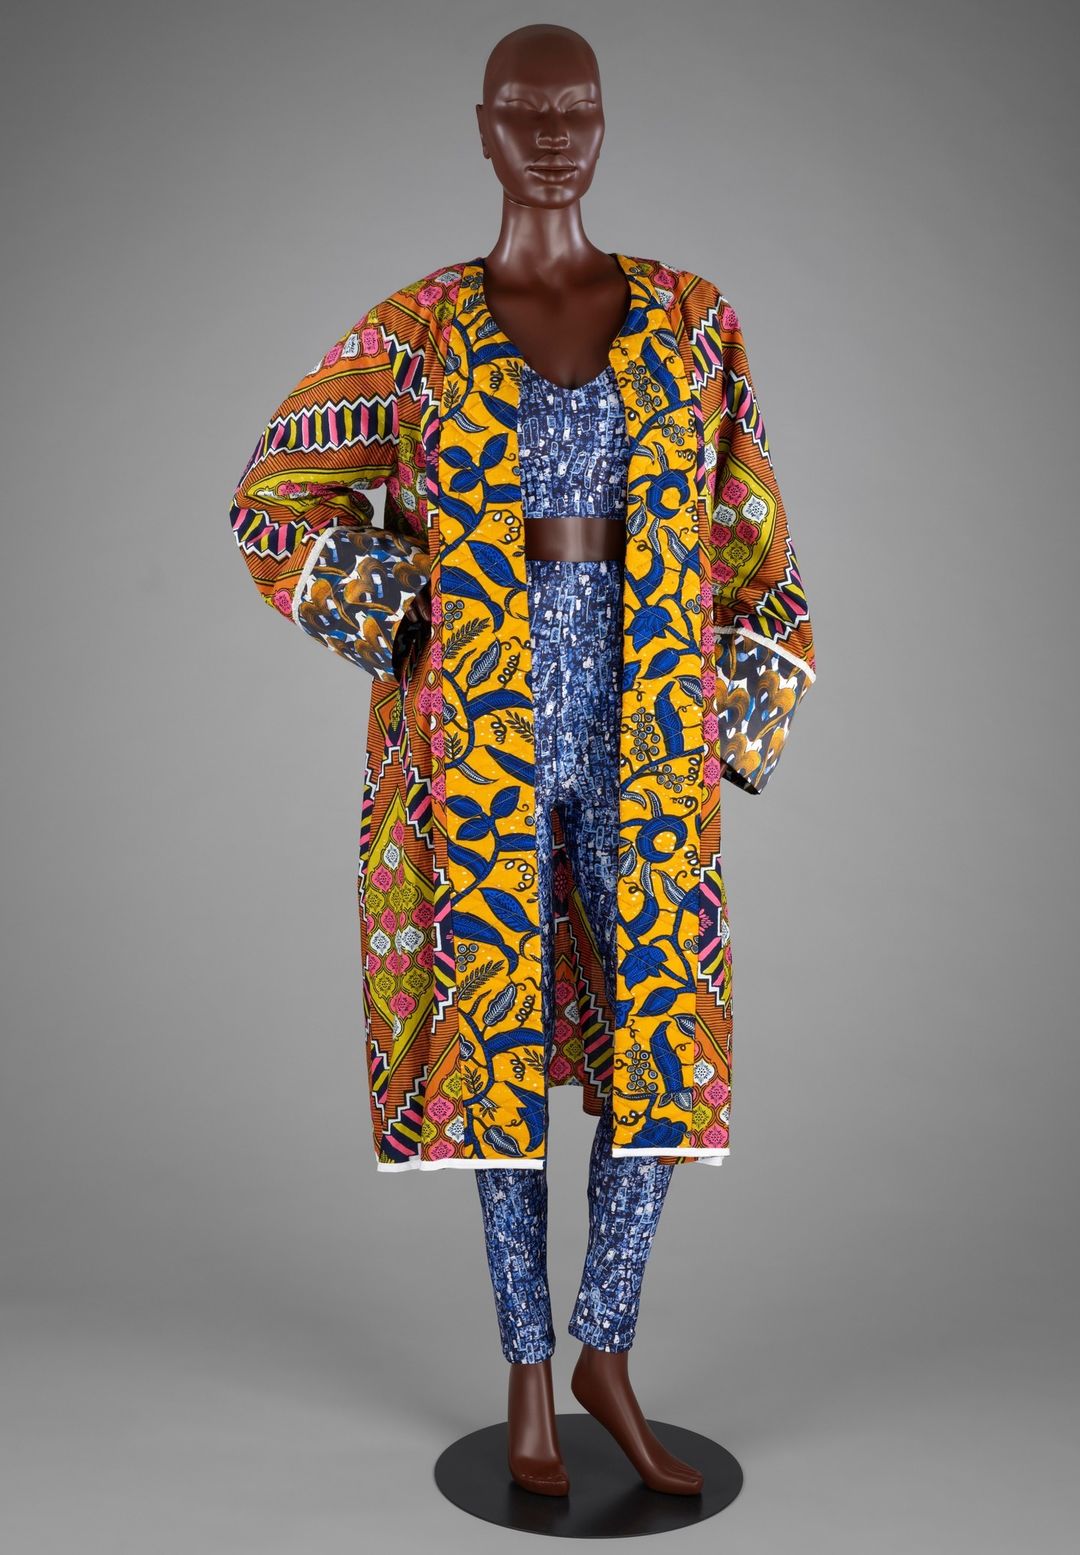 In pictures: V&A celebrates Africa's cutting-edge fashion - BBC News